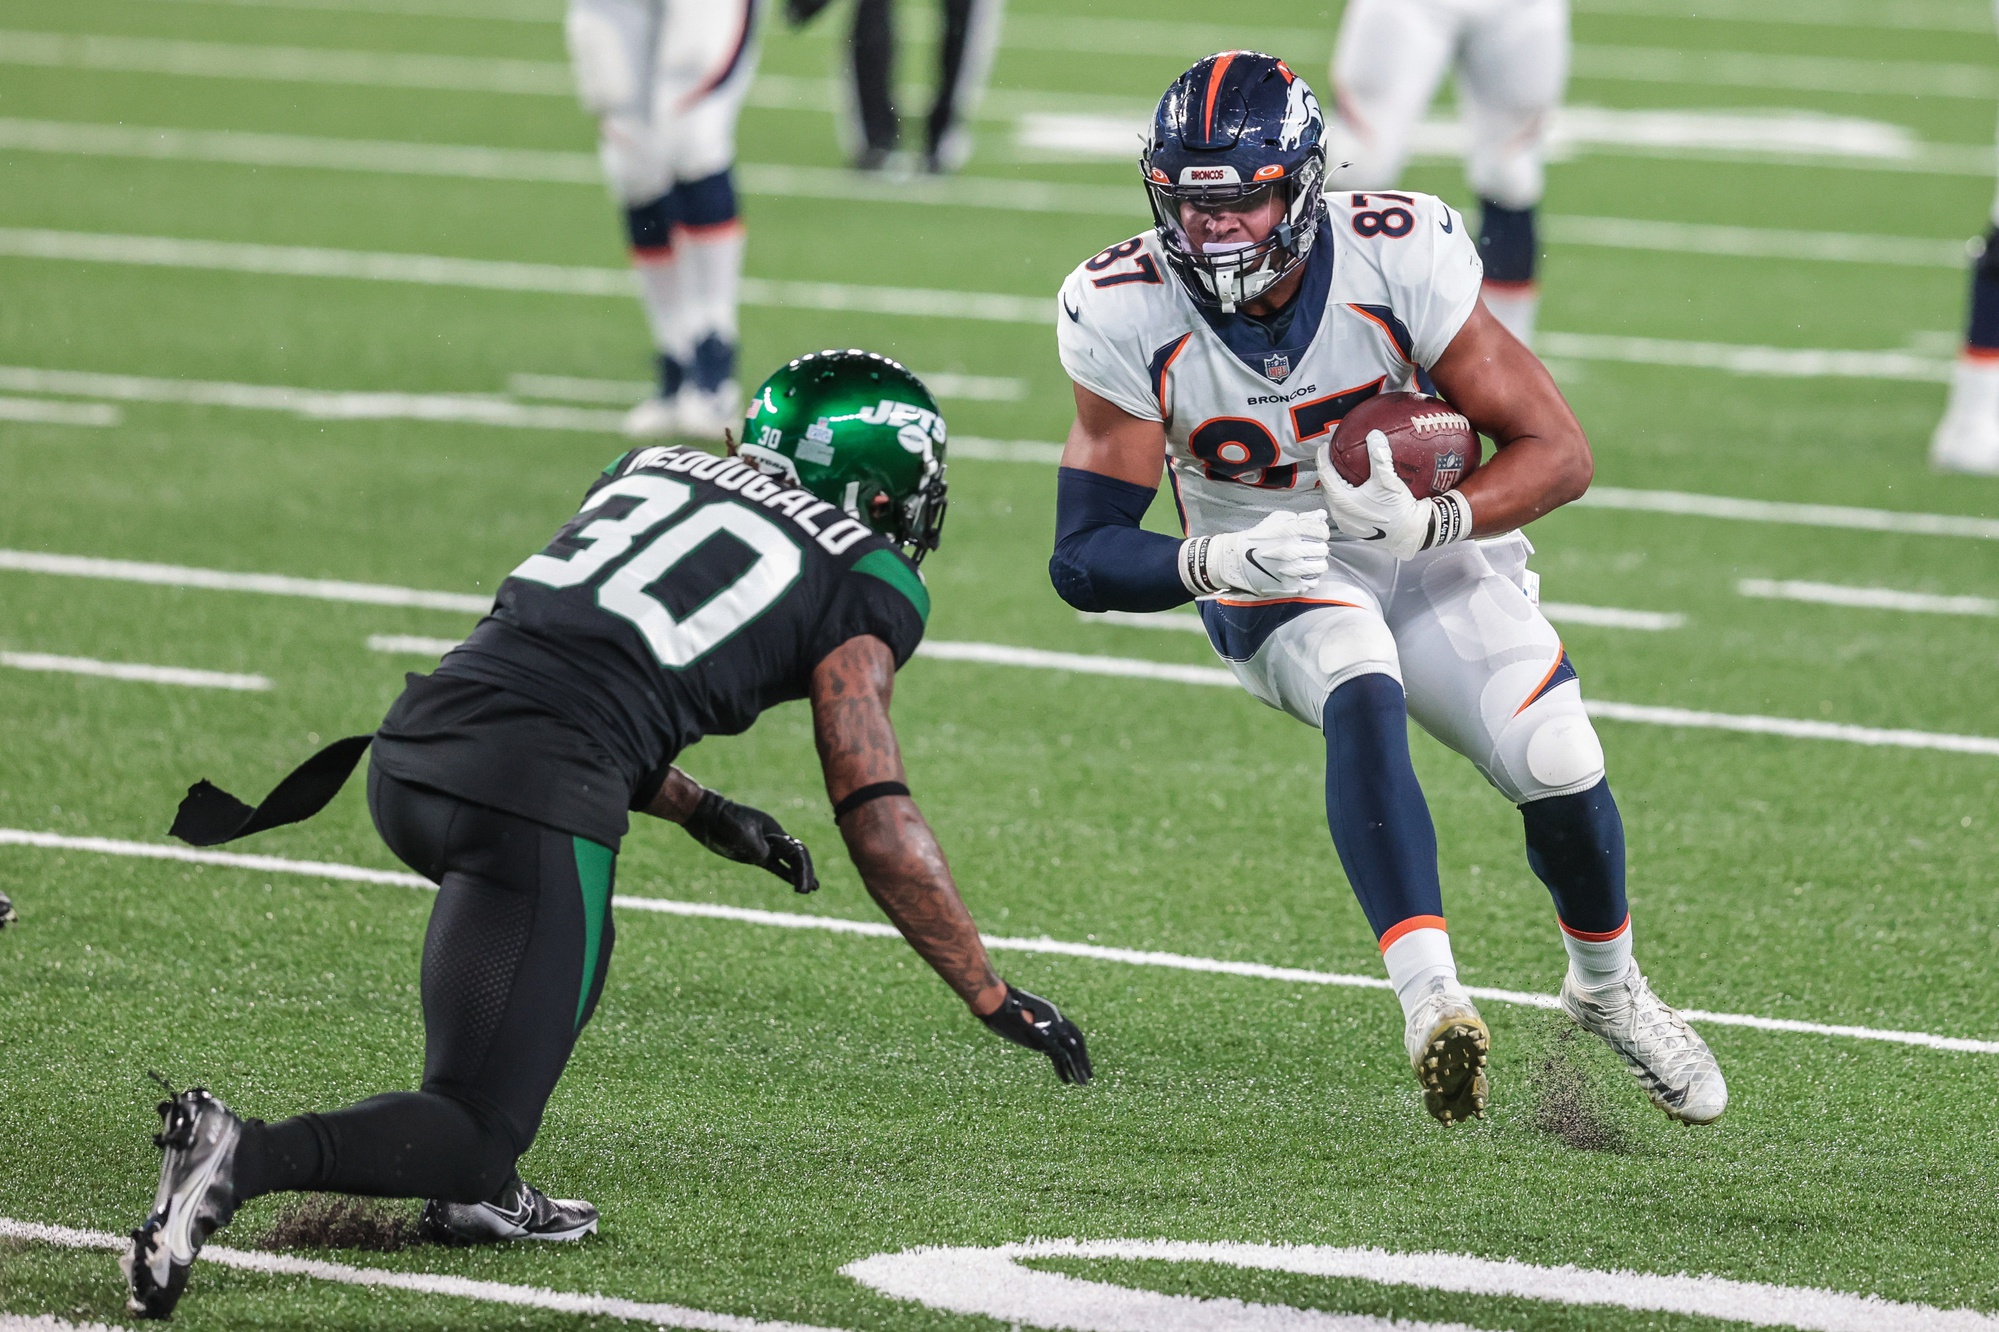 Denver Broncos tight end Noah Fant (87) gains yards after catch as New York Jets strong safety Bradley McDougald (30) defends during the second half at MetLife Stadium.